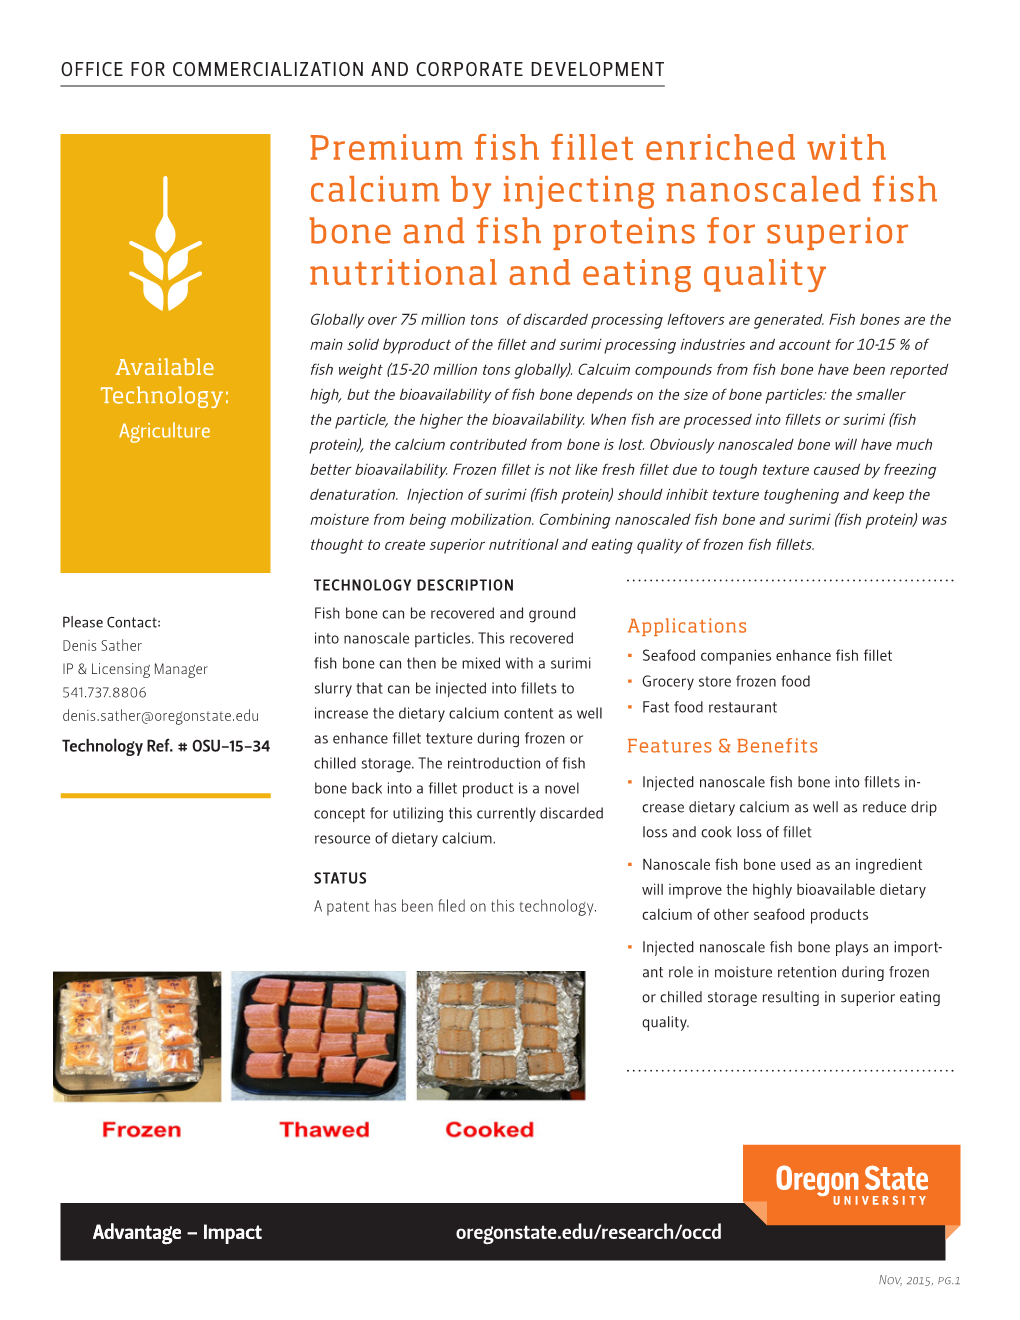 Premium Fish Fillet Enriched with Calcium by Injecting Nanoscaled Fish Bone and Fish Proteins for Superior Nutritional and Eating Quality